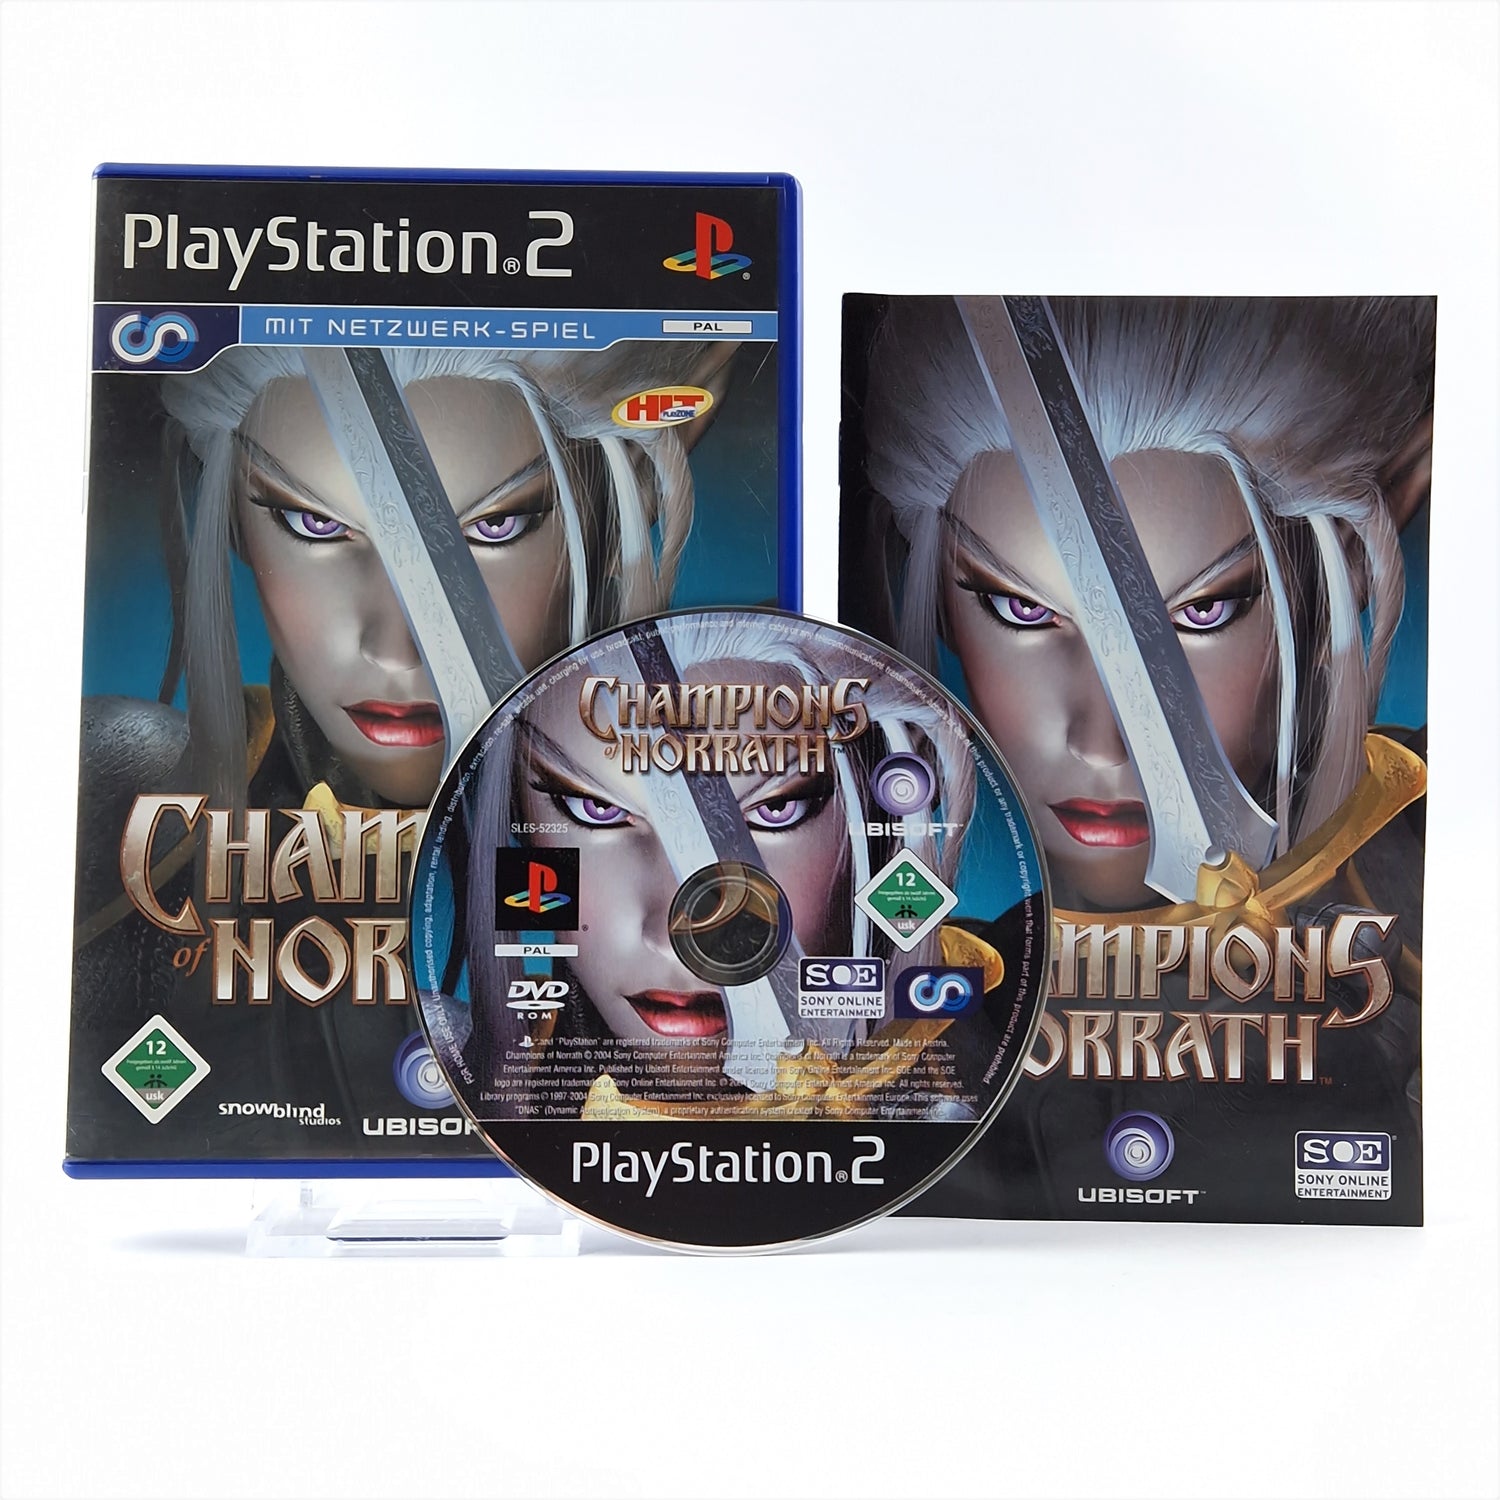 Playstation 2 Spiel : Champions of Norrath - OVP Anleitung CD | PS2 PAL Game